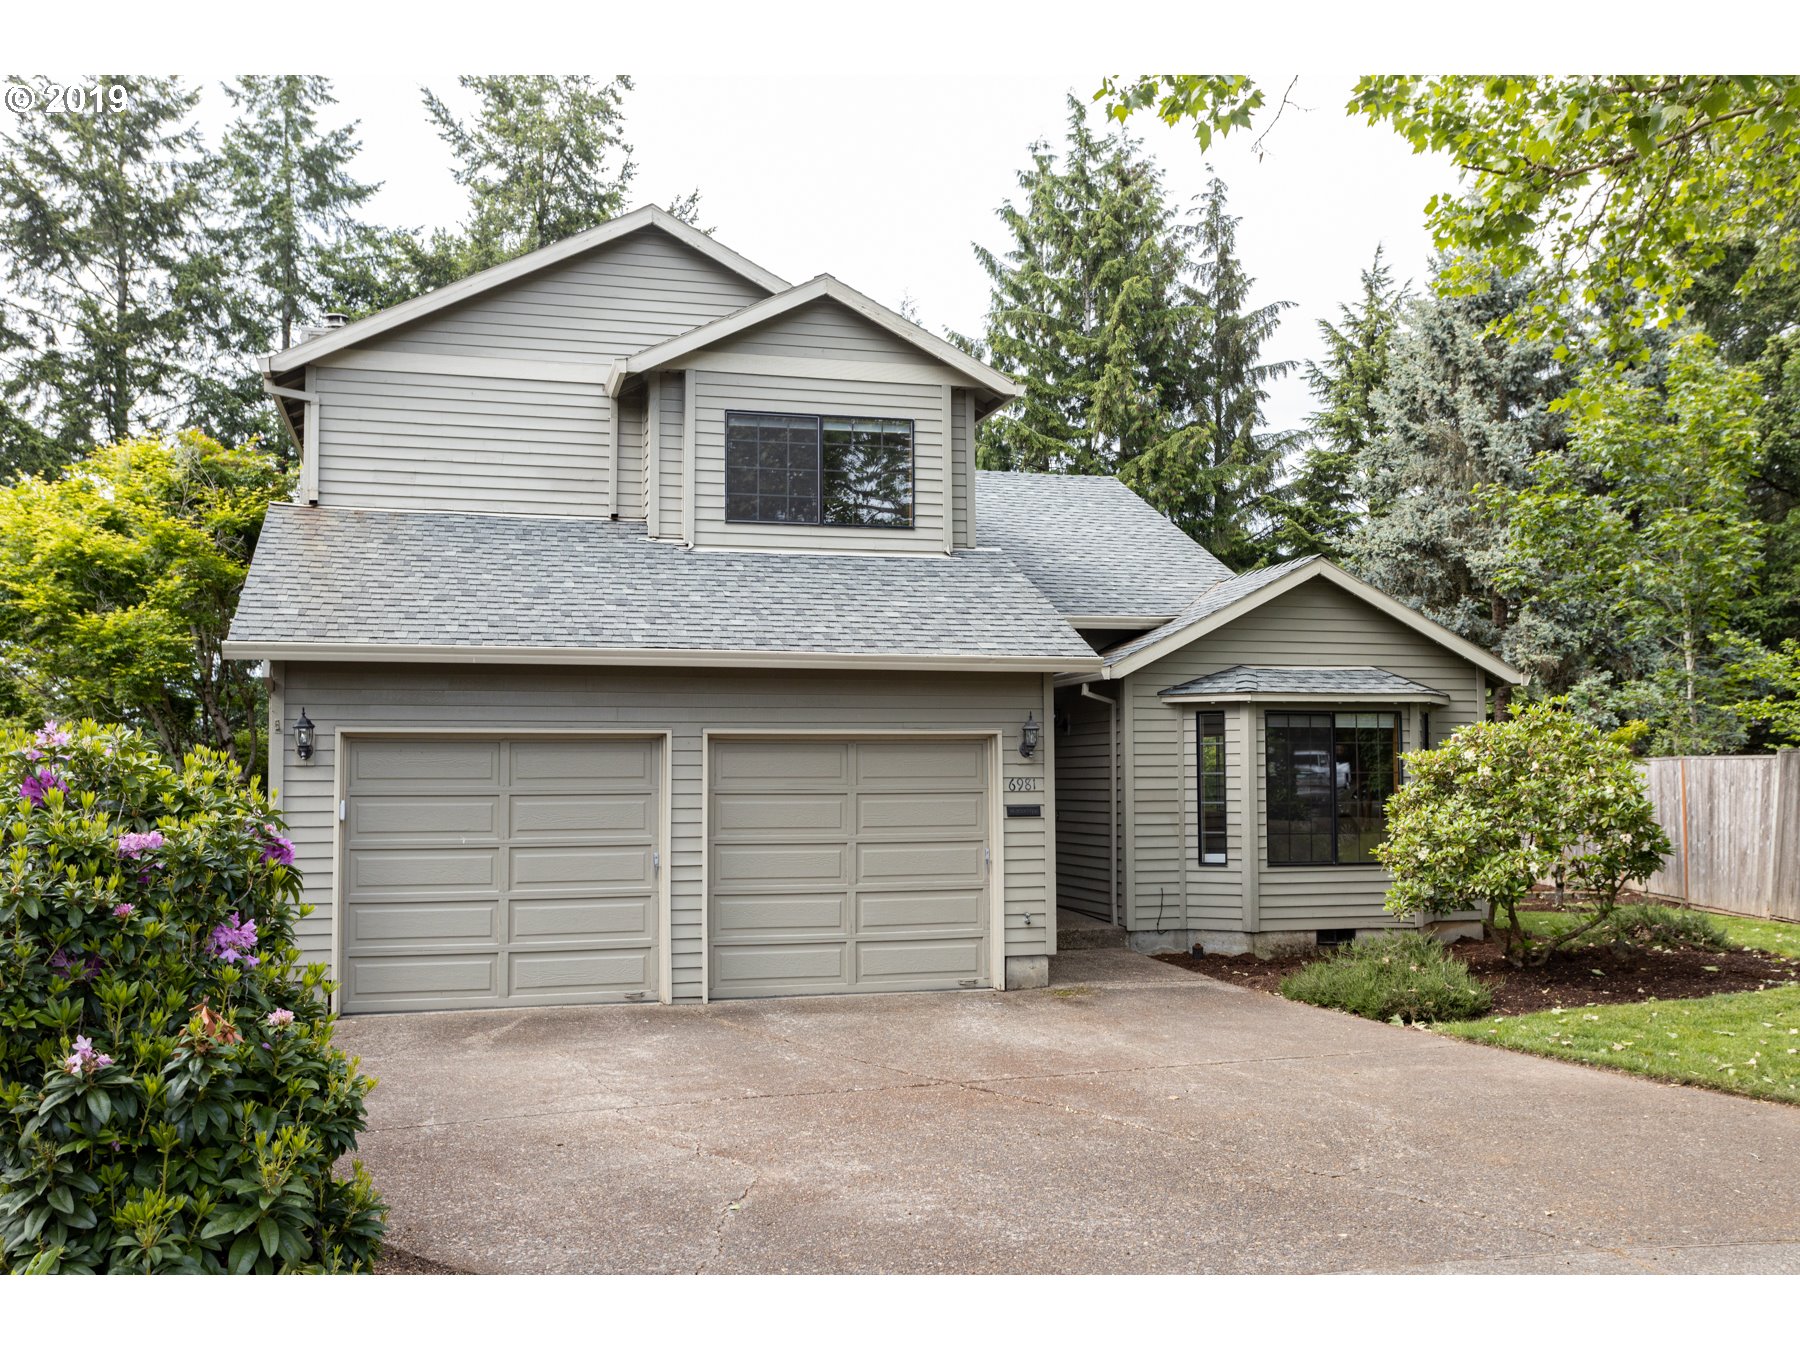 SOLD for $437,500! Only 4 DOM! 6981 SW 166th Terrace, Beaverton 97007.